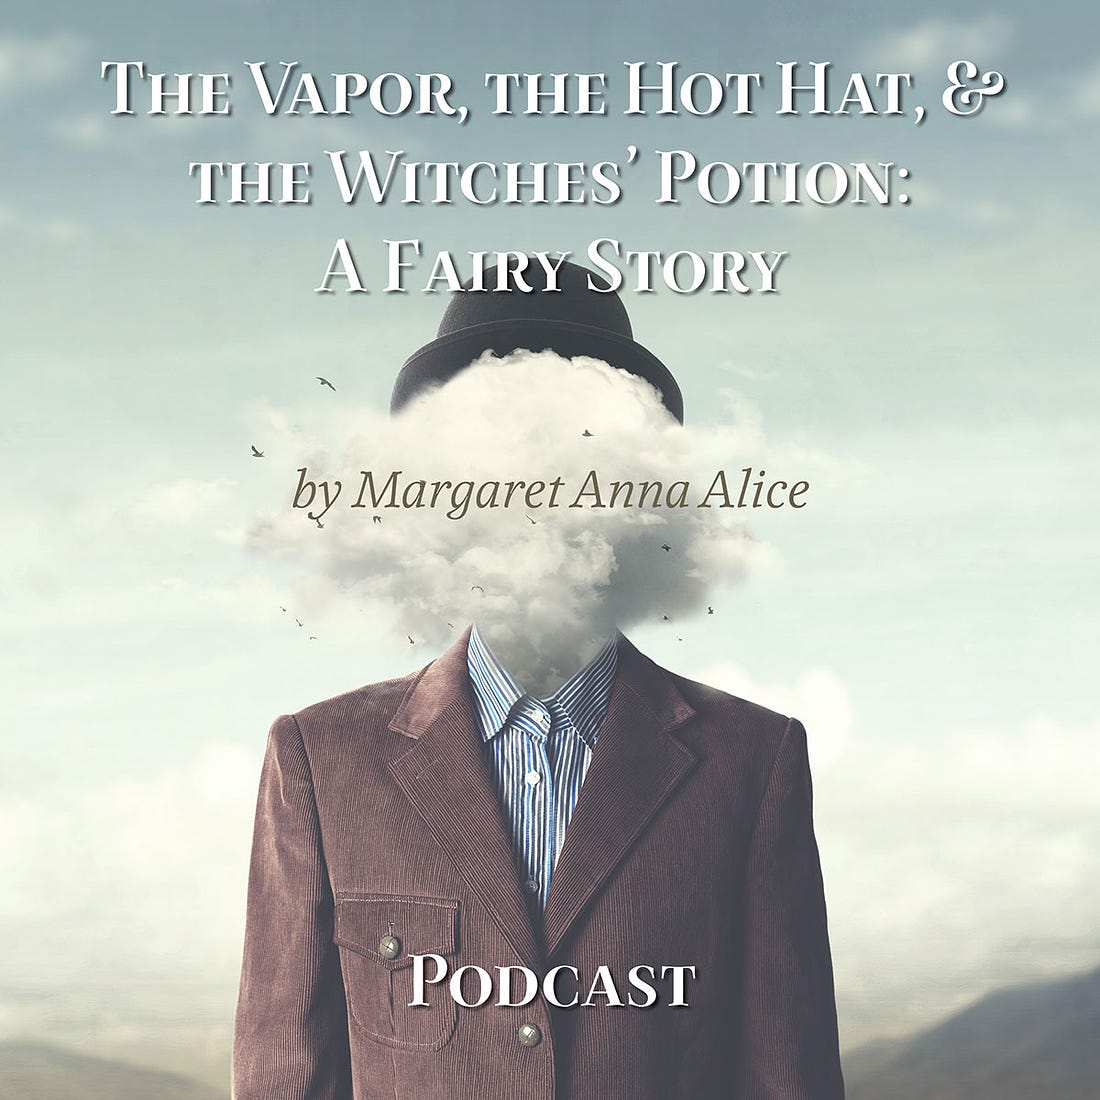 The Vapor, the Hot Hat, & the Witches’ Potion: A Fairy Story (Podcast)